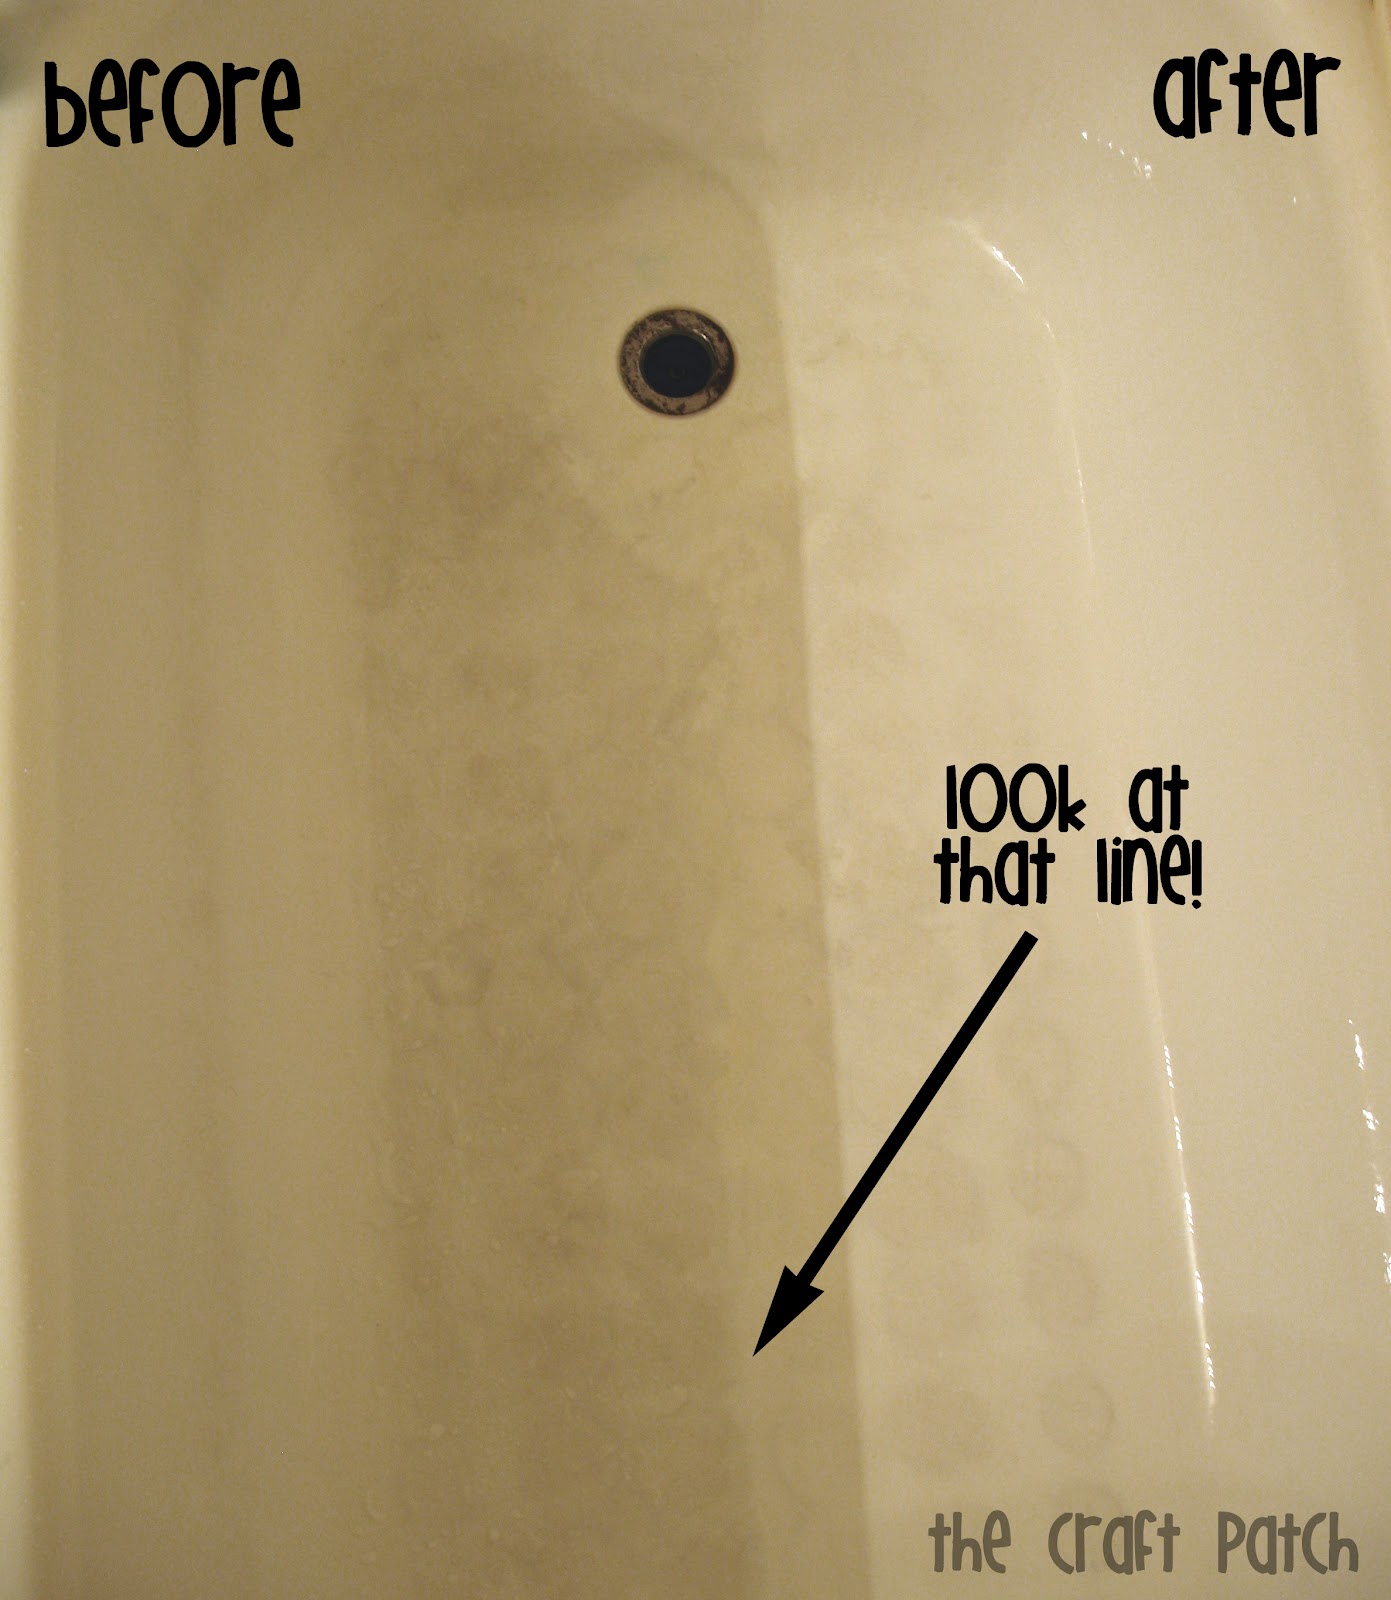 How do you remove dirt and stains from a plastic bathtub?